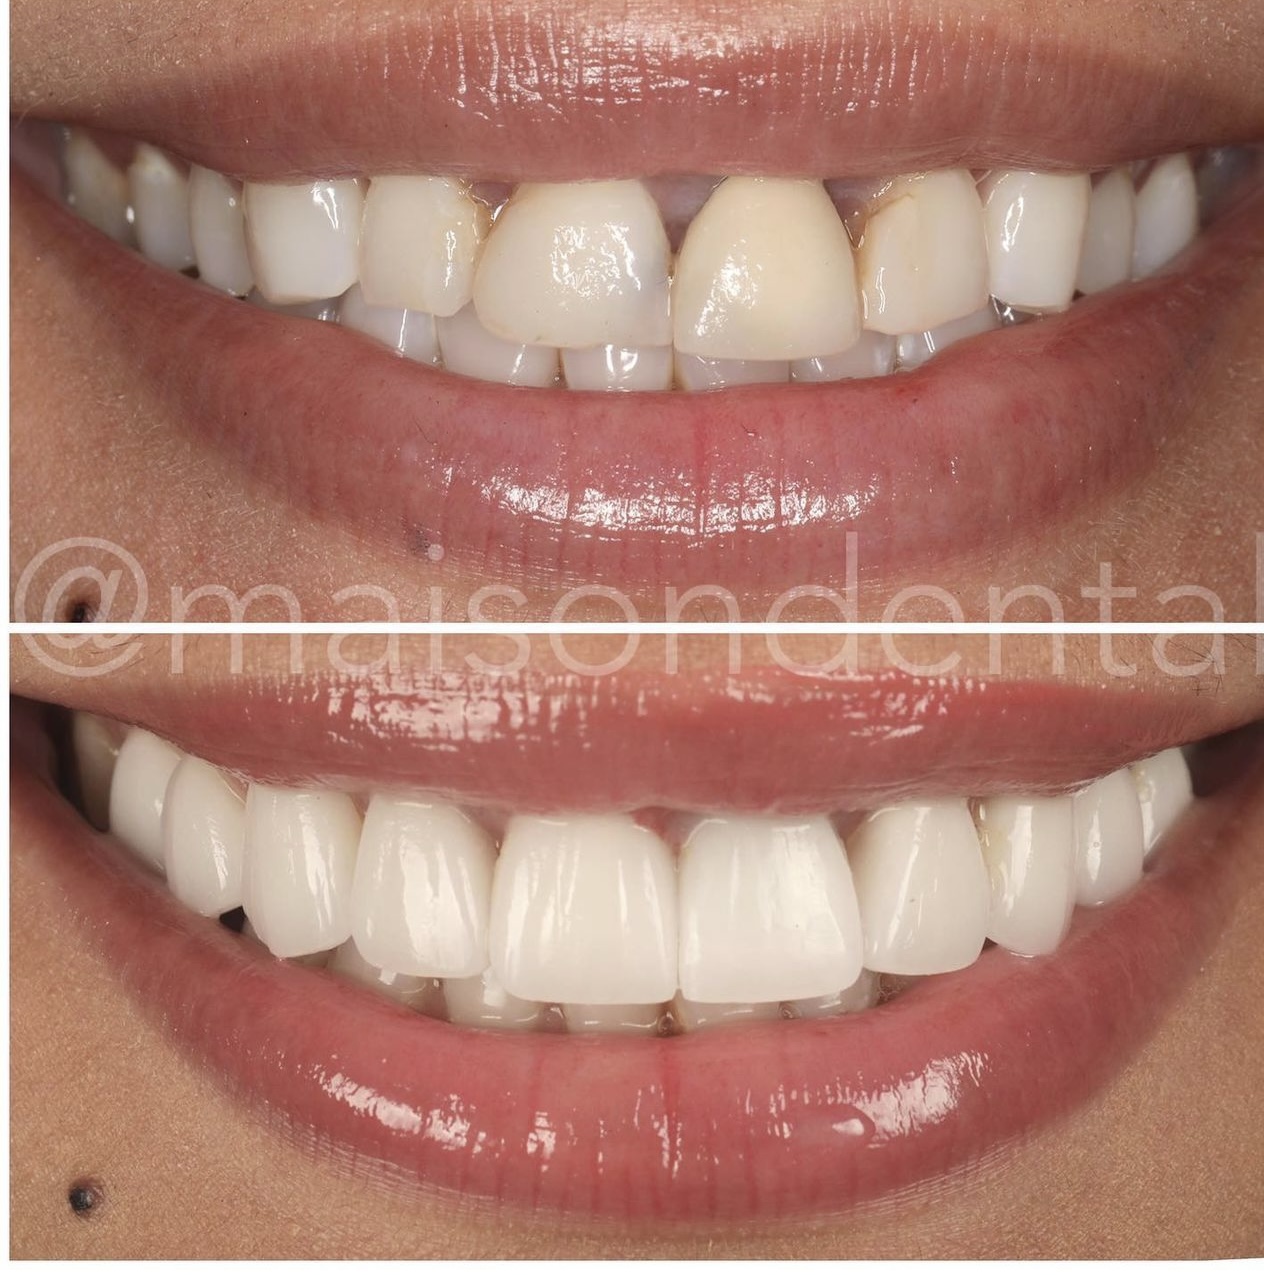 Restoring Broken Teeth, Correcting Alignment and Producing a Wider Brighter Smile